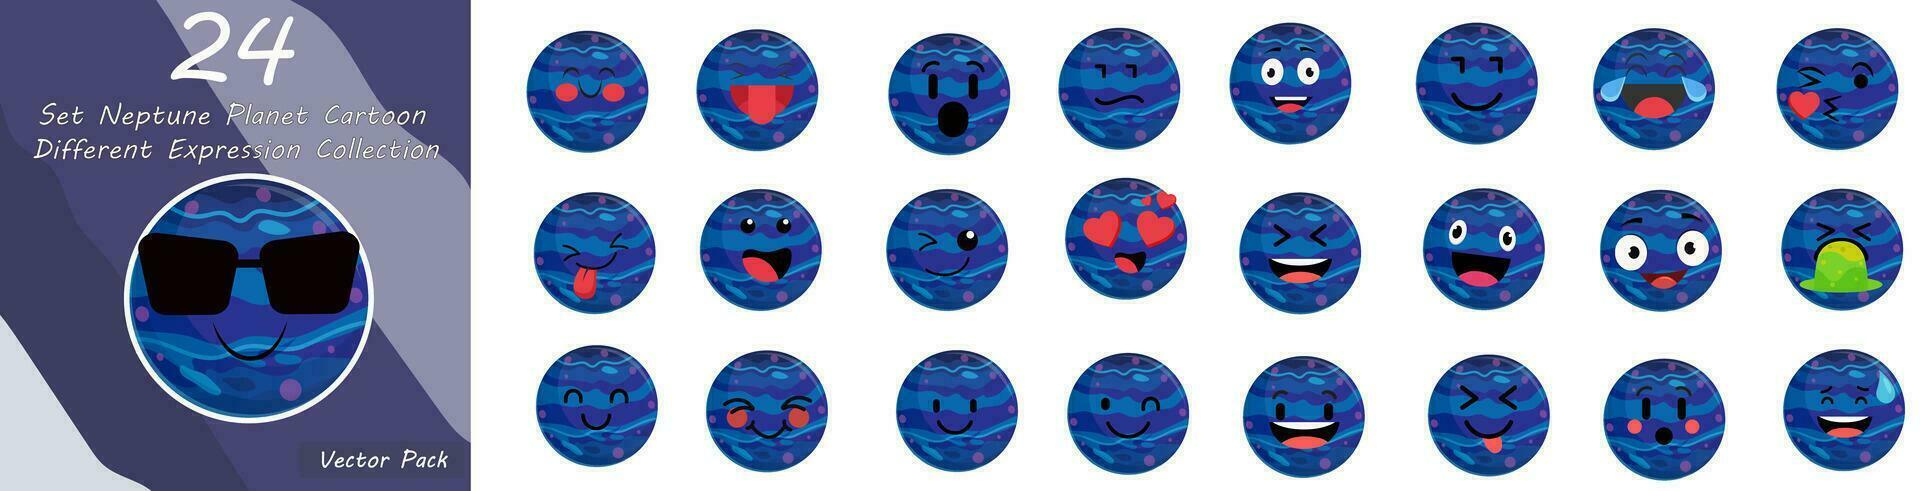 Neptune Planet cartoon emoticons on white background vector